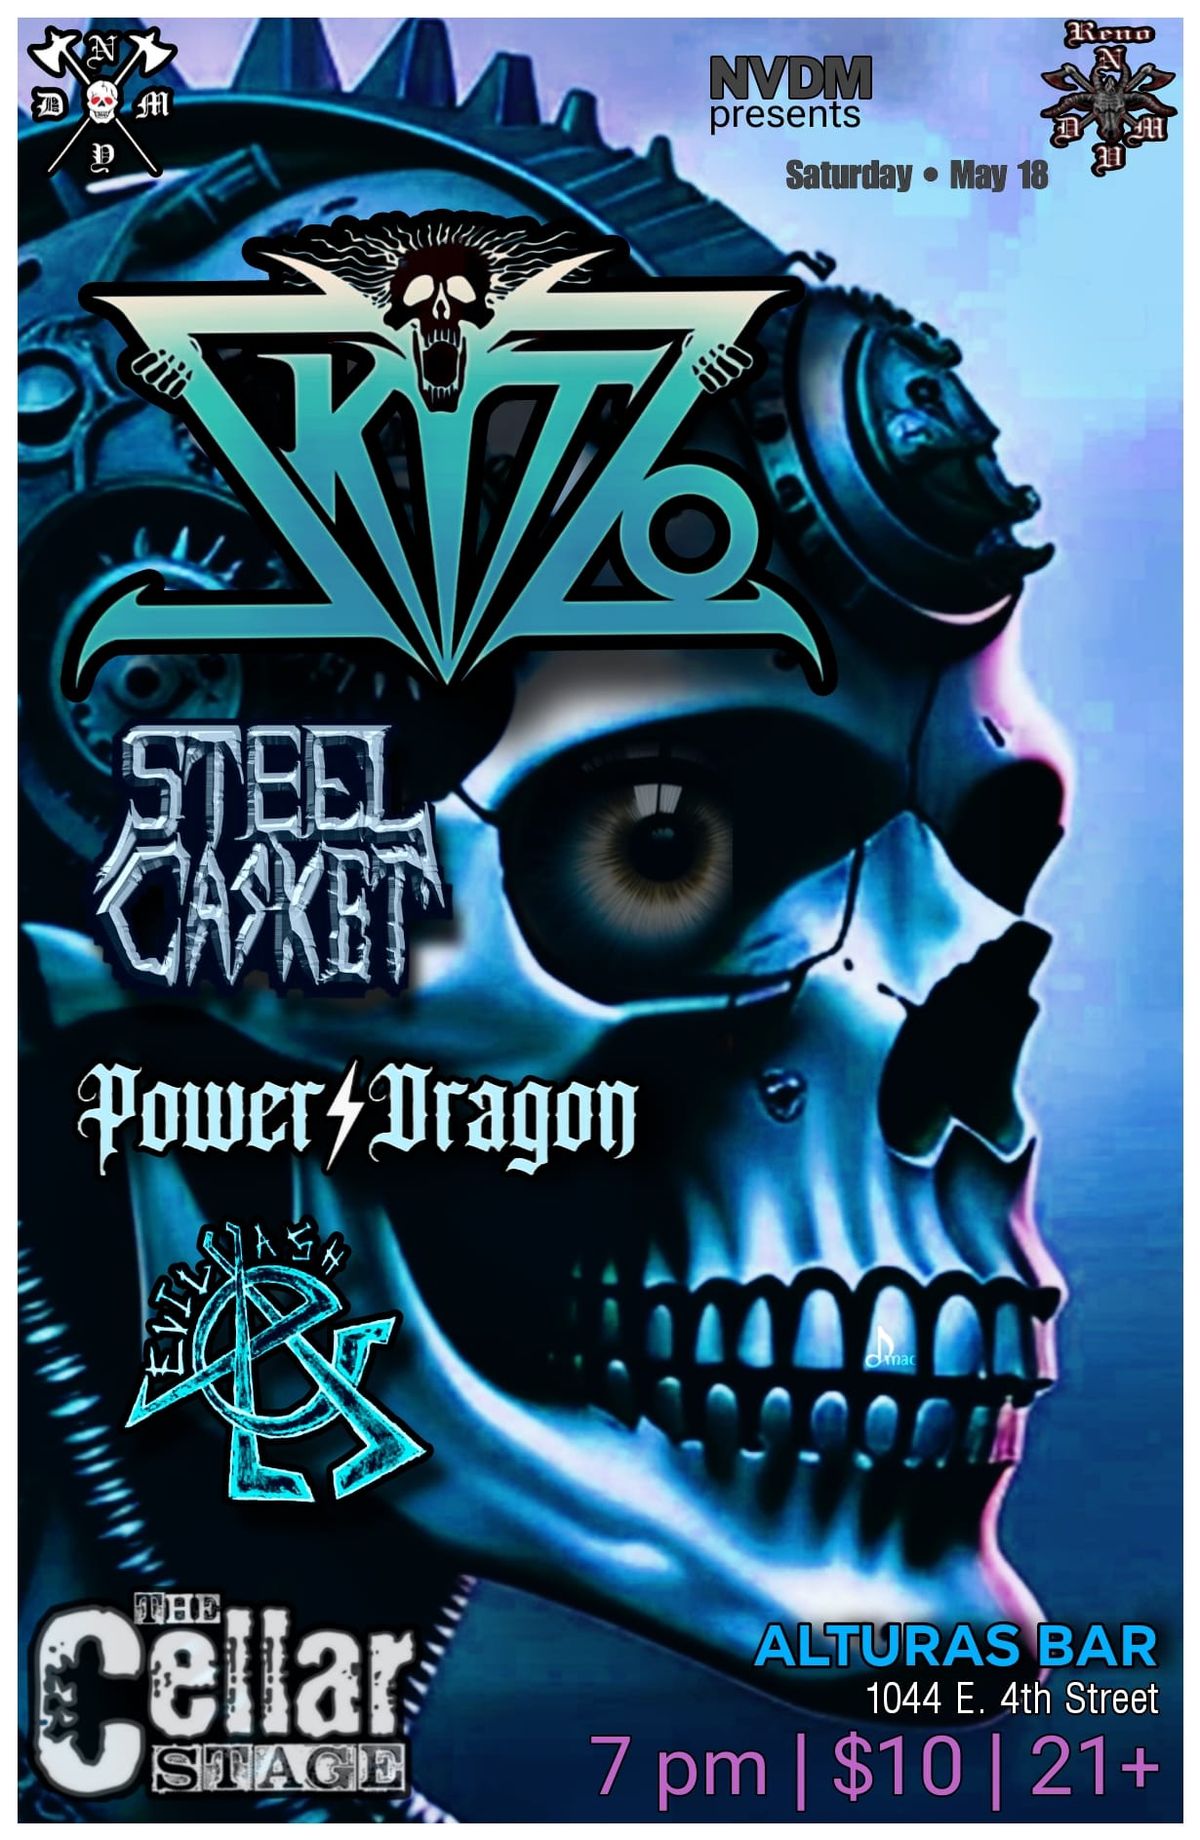 NVDM presents SKITZO with Steel Casket, Power Dragon and Evil Ash